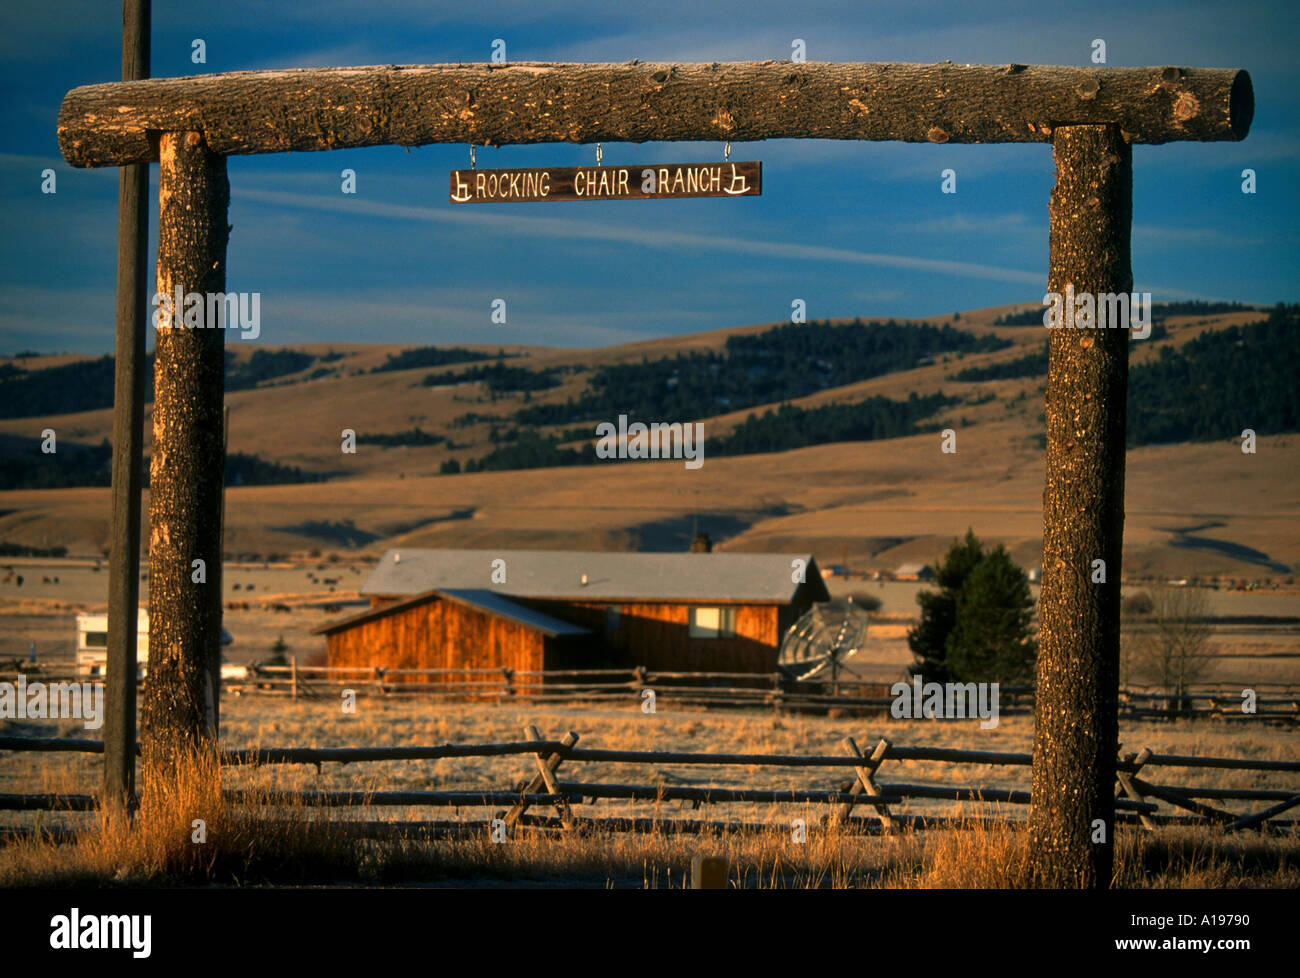 Ranch Gate To Rocking Chair Ranch Near Philipsburg Granite County West Montana Usa R Francis Stock Photo Alamy